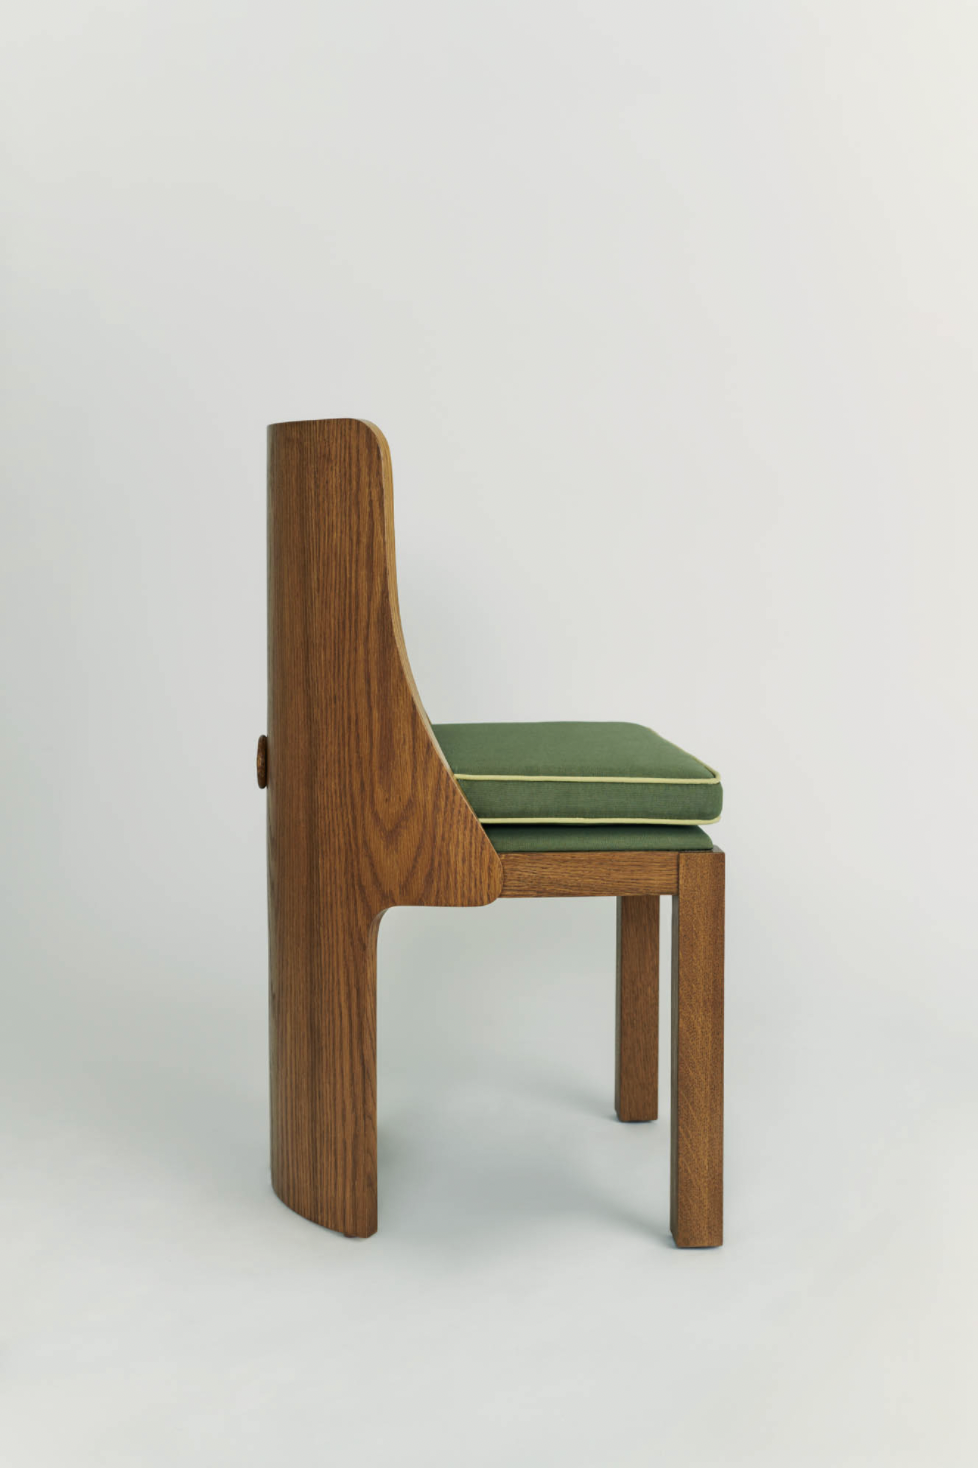 No. 173 END CHAIR